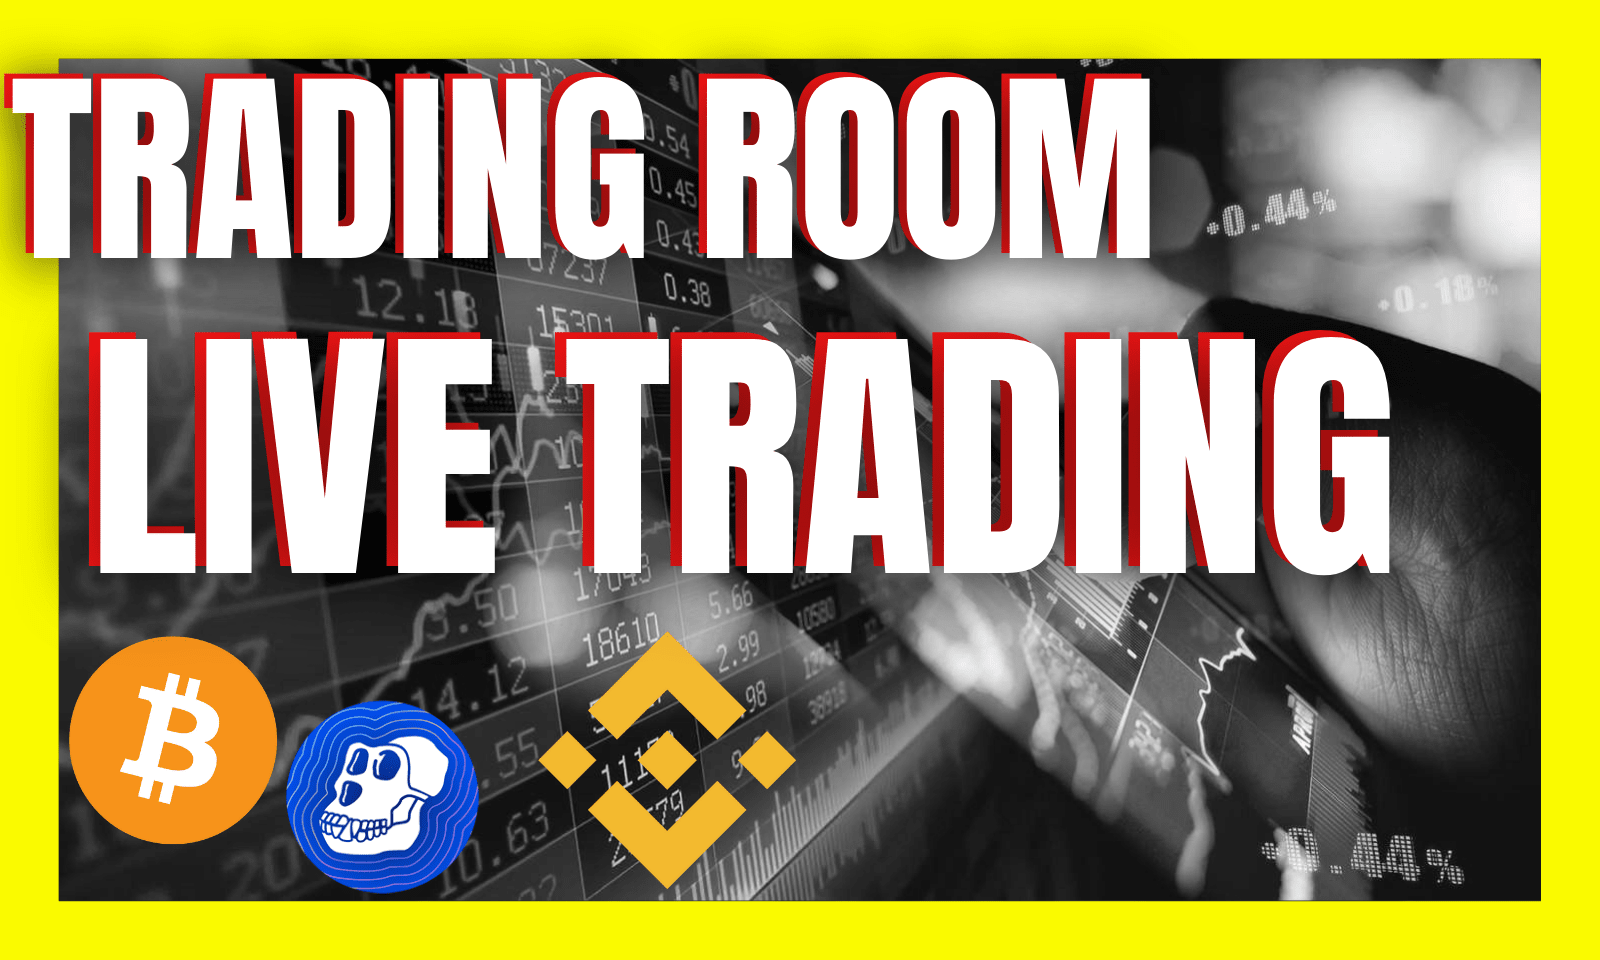 LIVE TRADING with Scott - TRADING ROOM